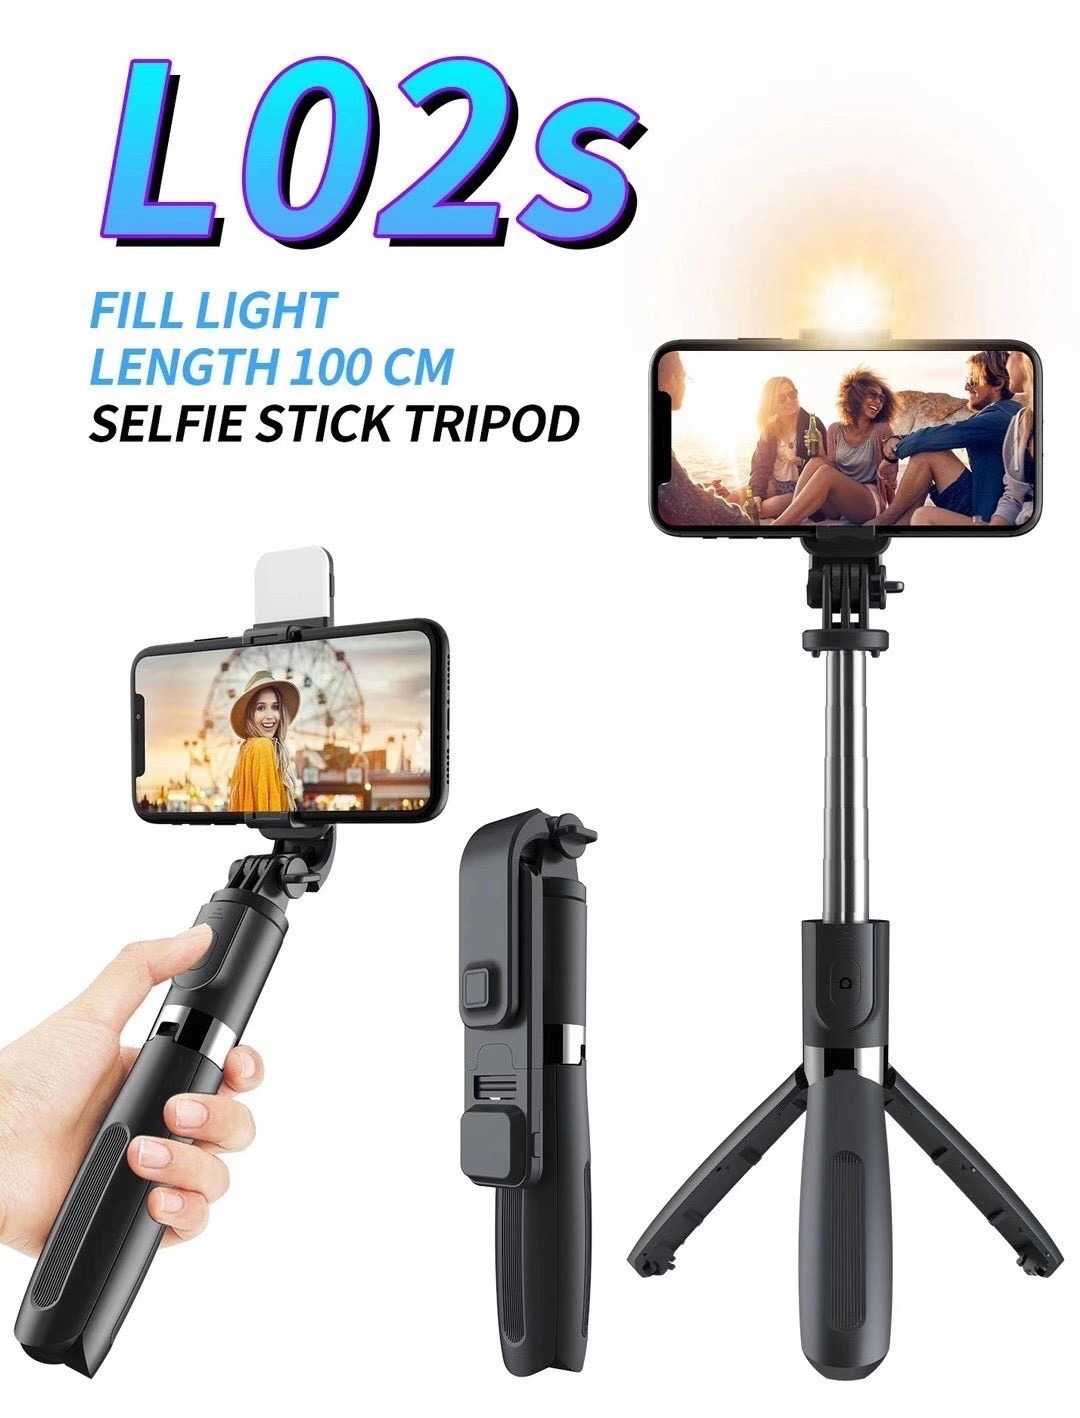 Selfie stick/stand tripod with lens - L02s - 882887 